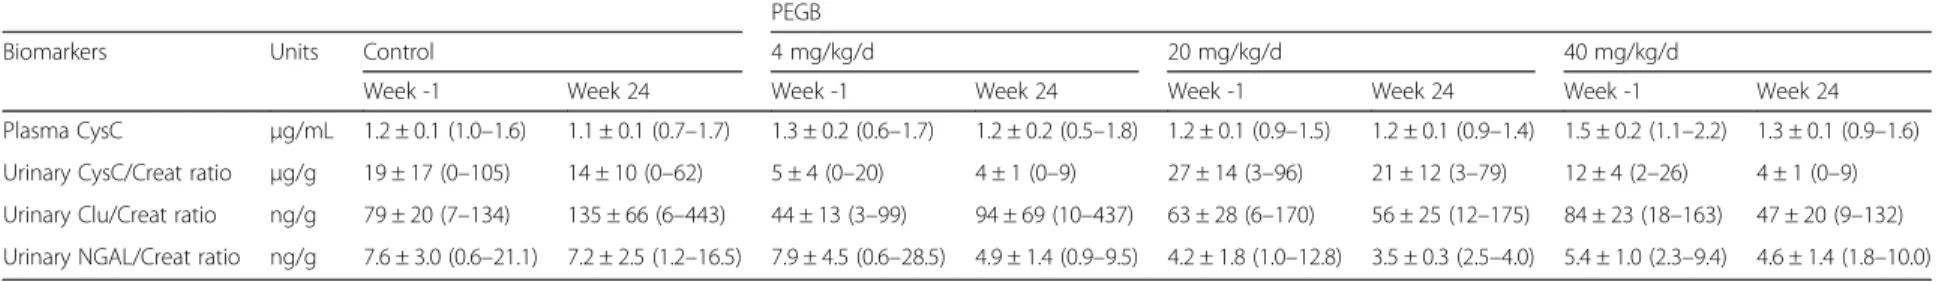 Table 3 Concentrations, and ratios, of early biomarkers of renal damage in dogs, at the initiation (Week -1) and the end (Week 24) of a 24-wk period of consumption of PEGB at 4, 20 or 40 mg/kg/d